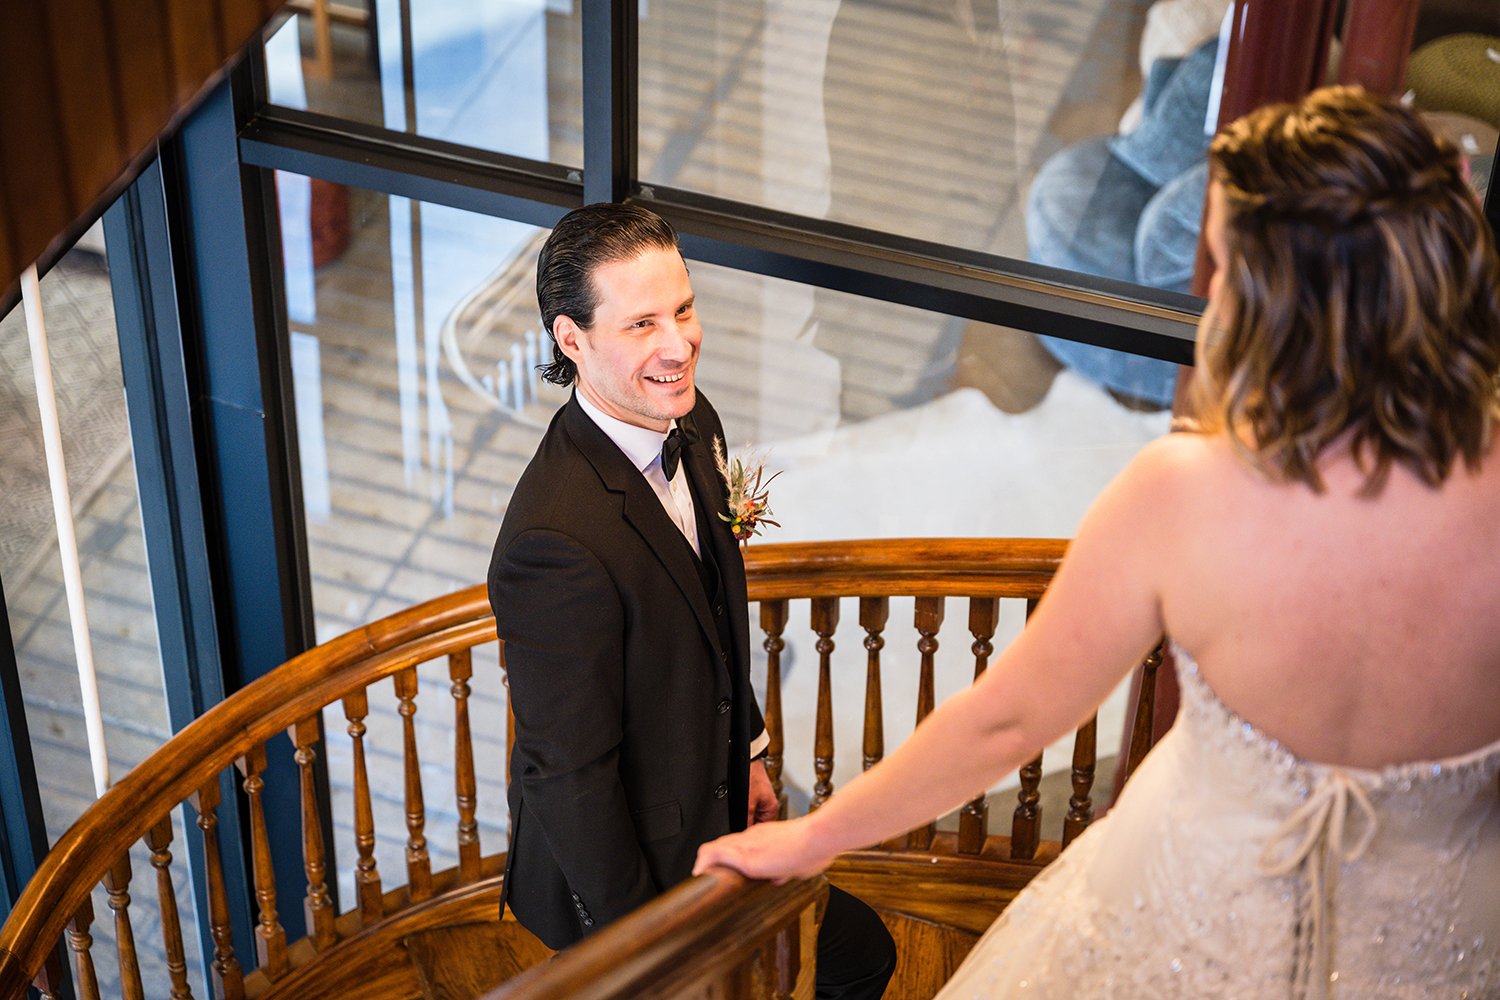 A groom smiles widely on his elopement as his soon-to-be wife comes down the stairwell at Fire Station One in her wedding dress.